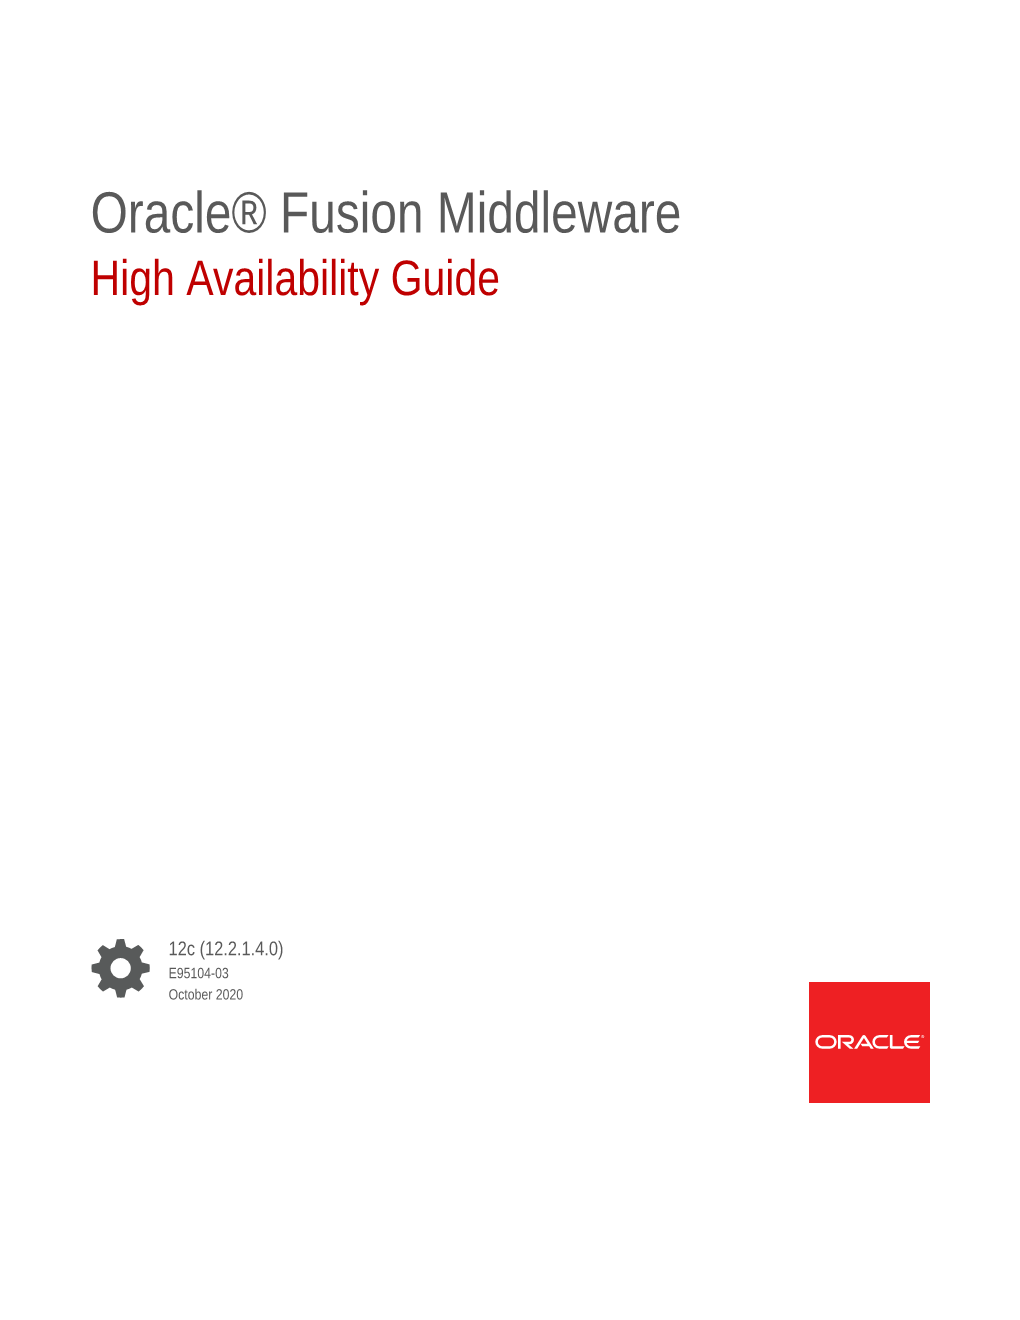 Oracle® Fusion Middleware High Availability Guide